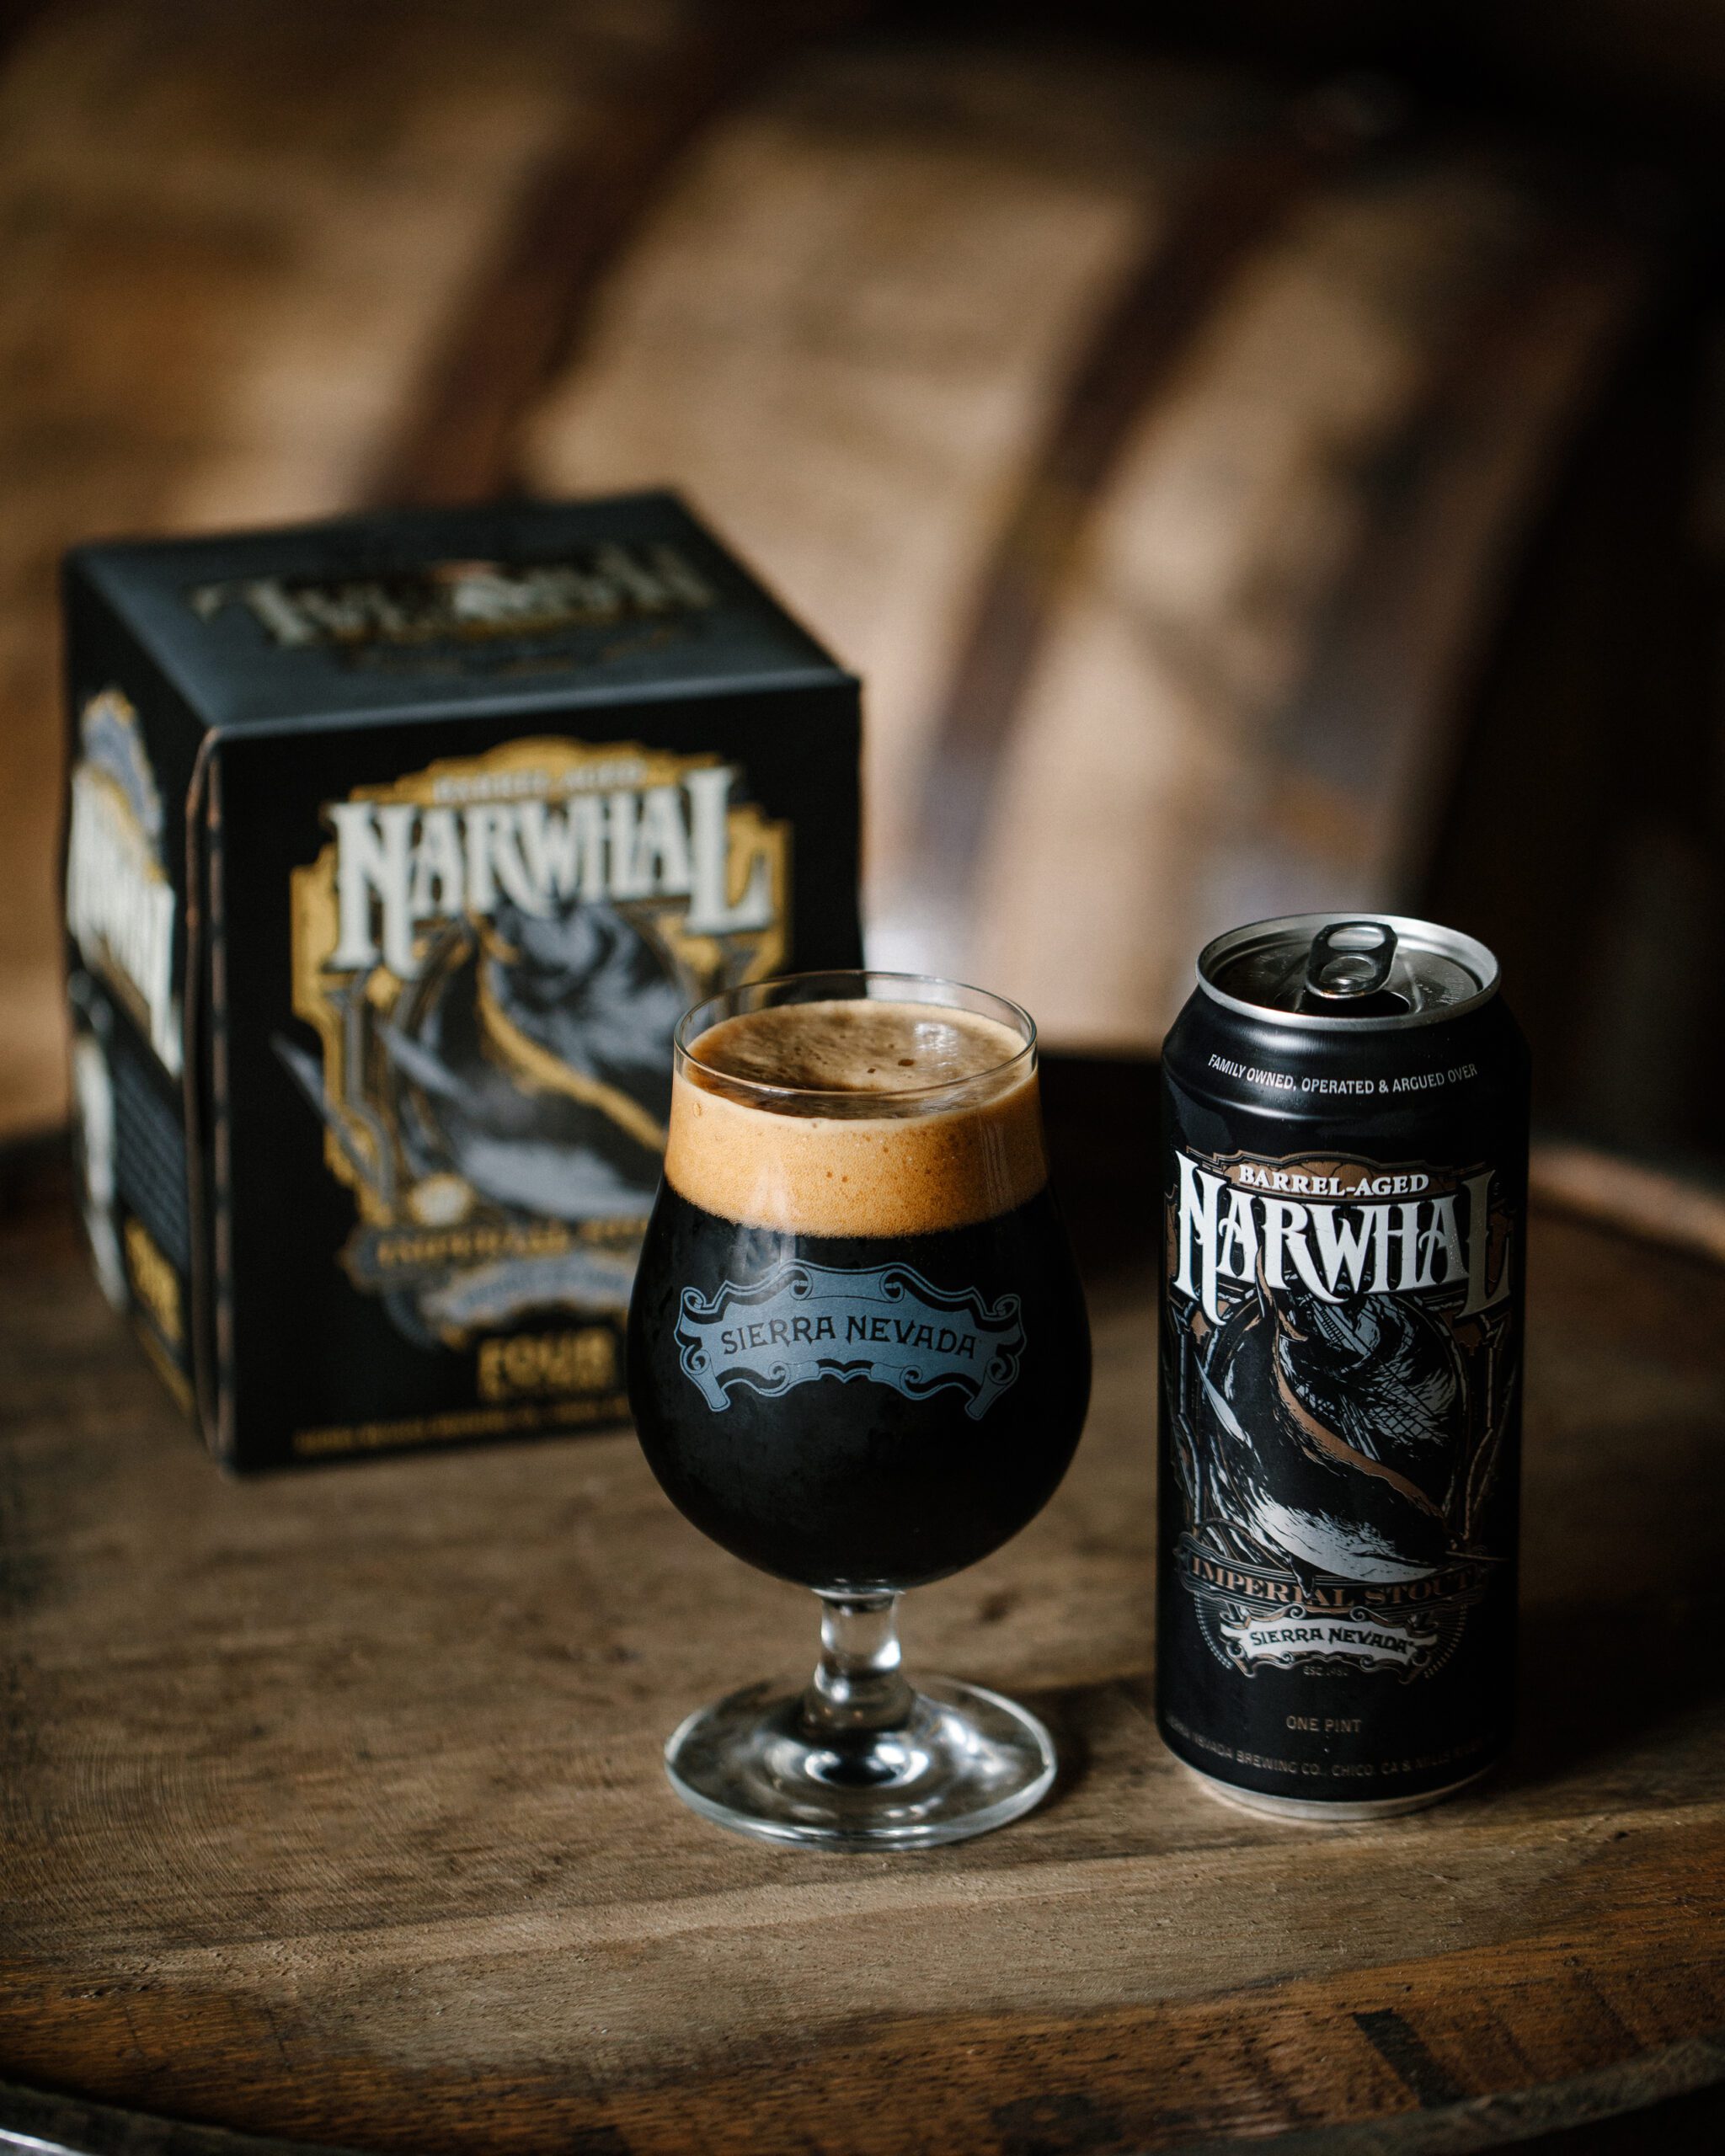 Sierra Nevada Barrel Aged Narwhal beer staged on top of a wooden barrel